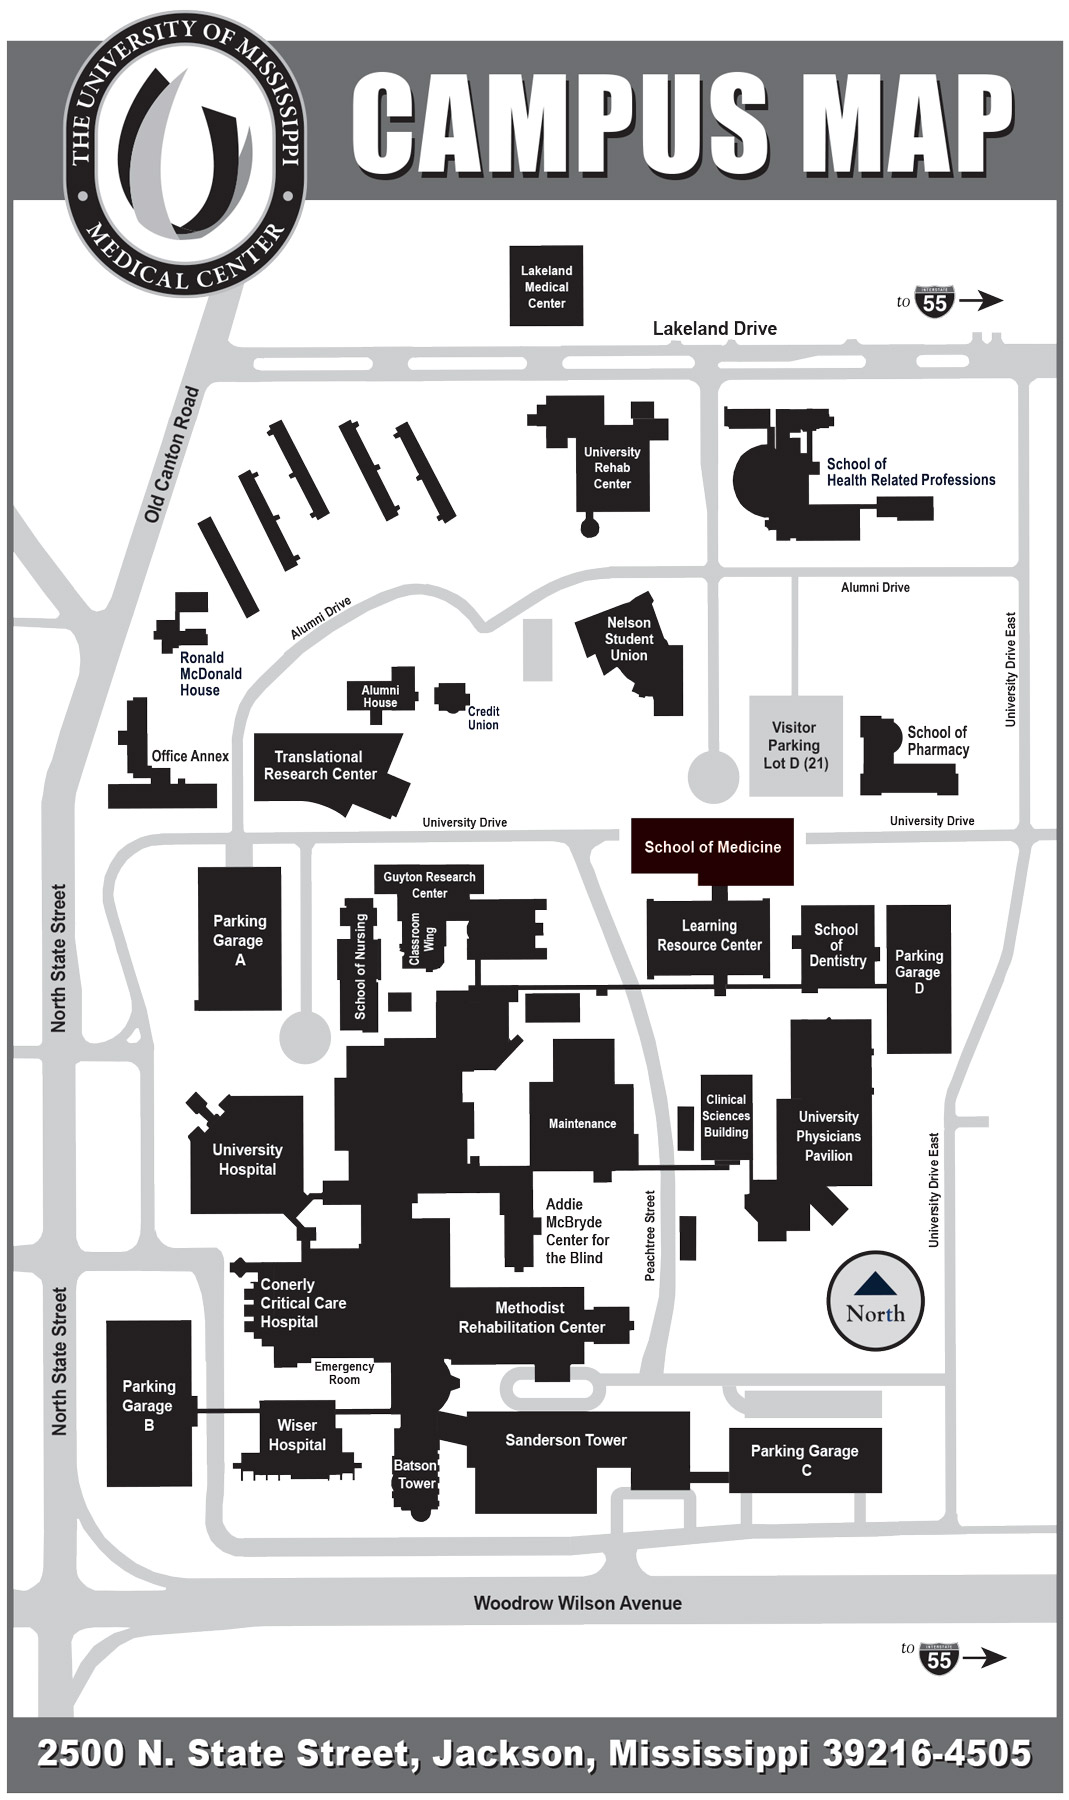 The University of Mississippi Medical Center Campus Map